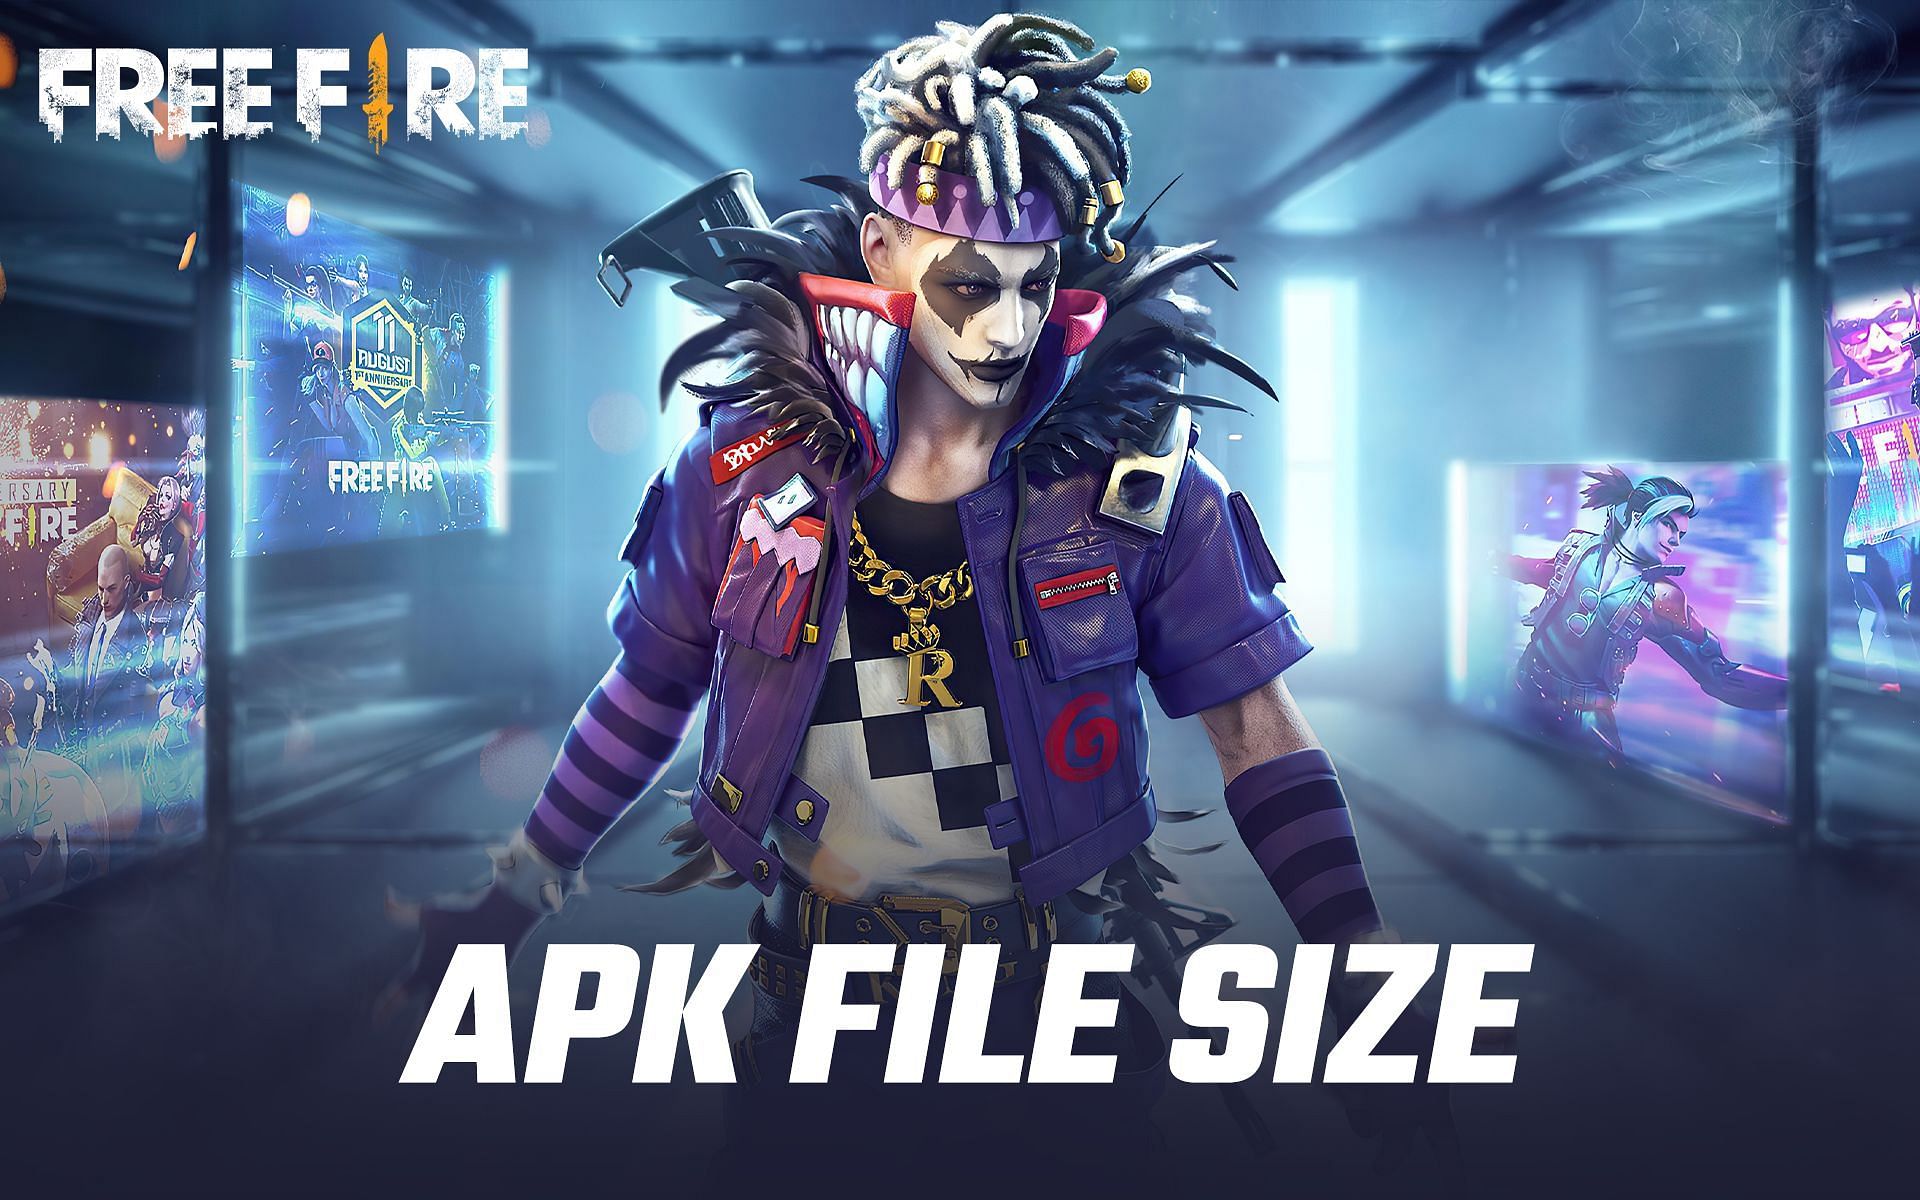 APK file size of the OB32 update is likely to be around 50 MB (Image via Sportskeeda)